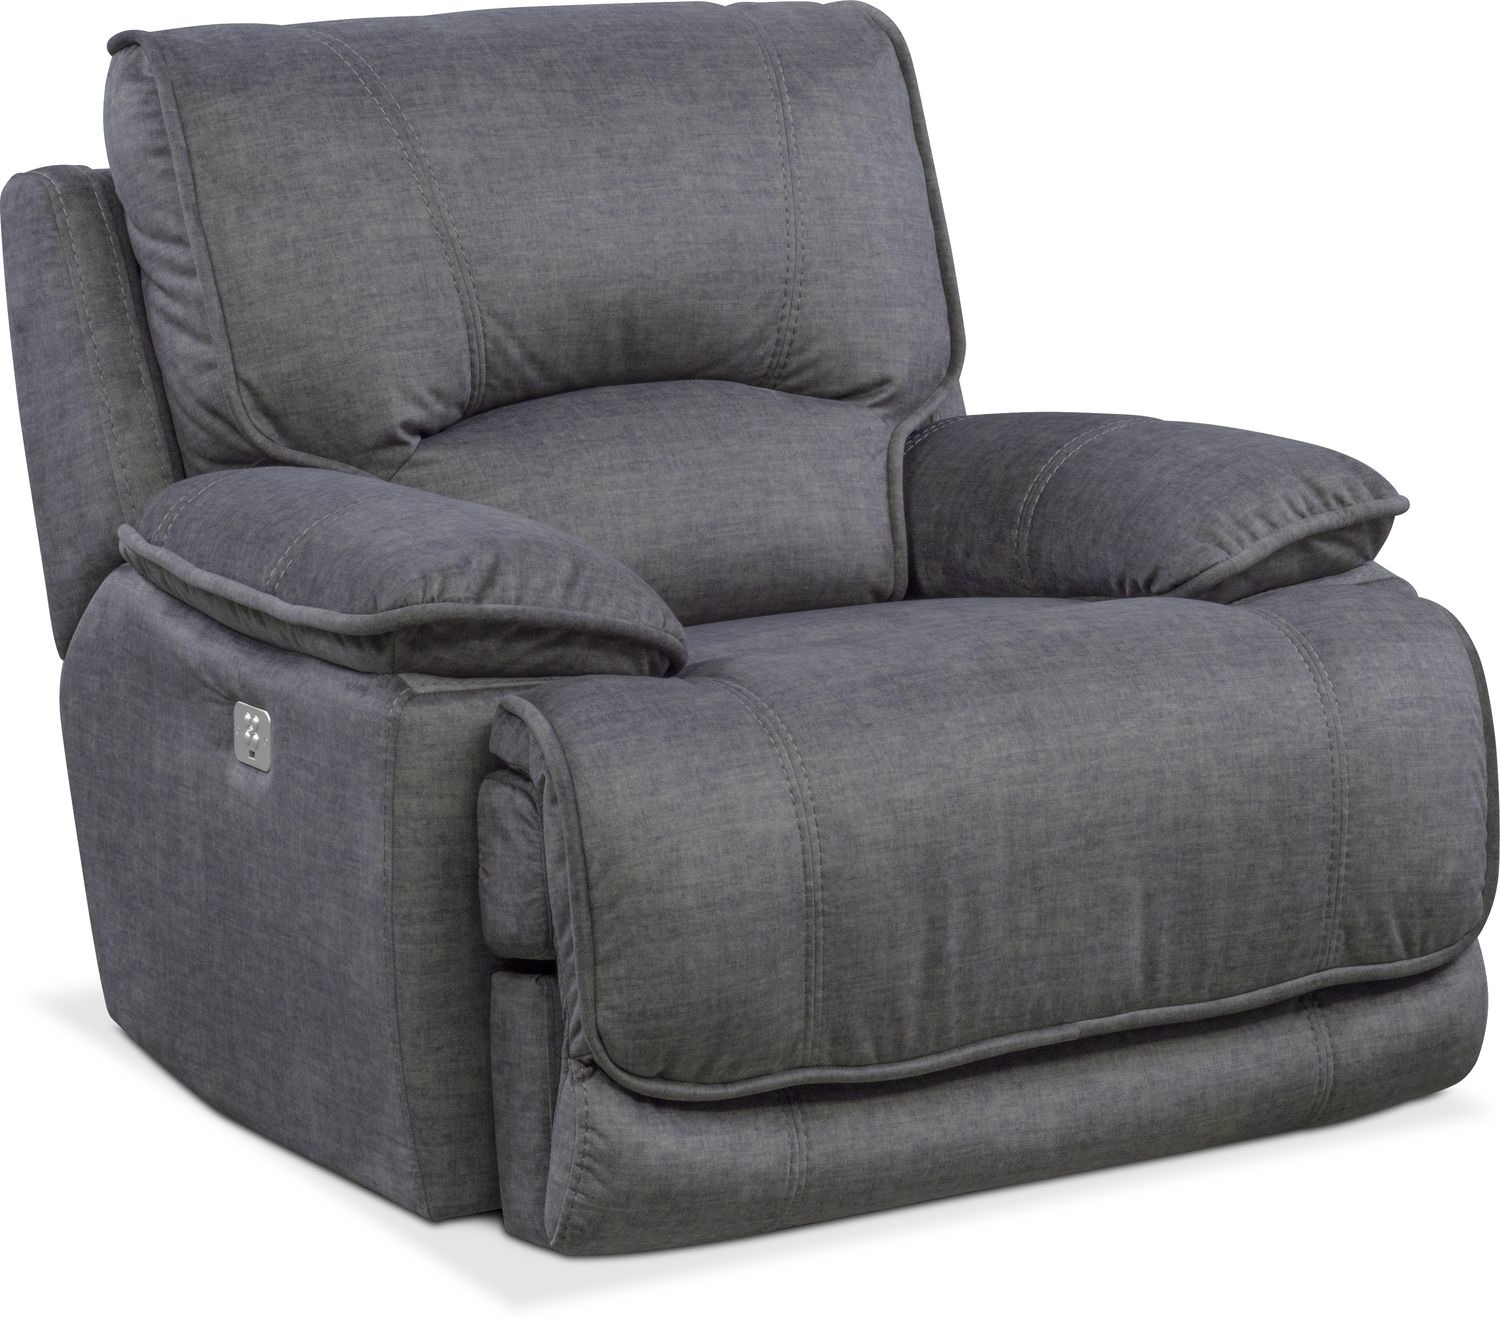 Mario Power Recliner | Value City Furniture and Mattresses